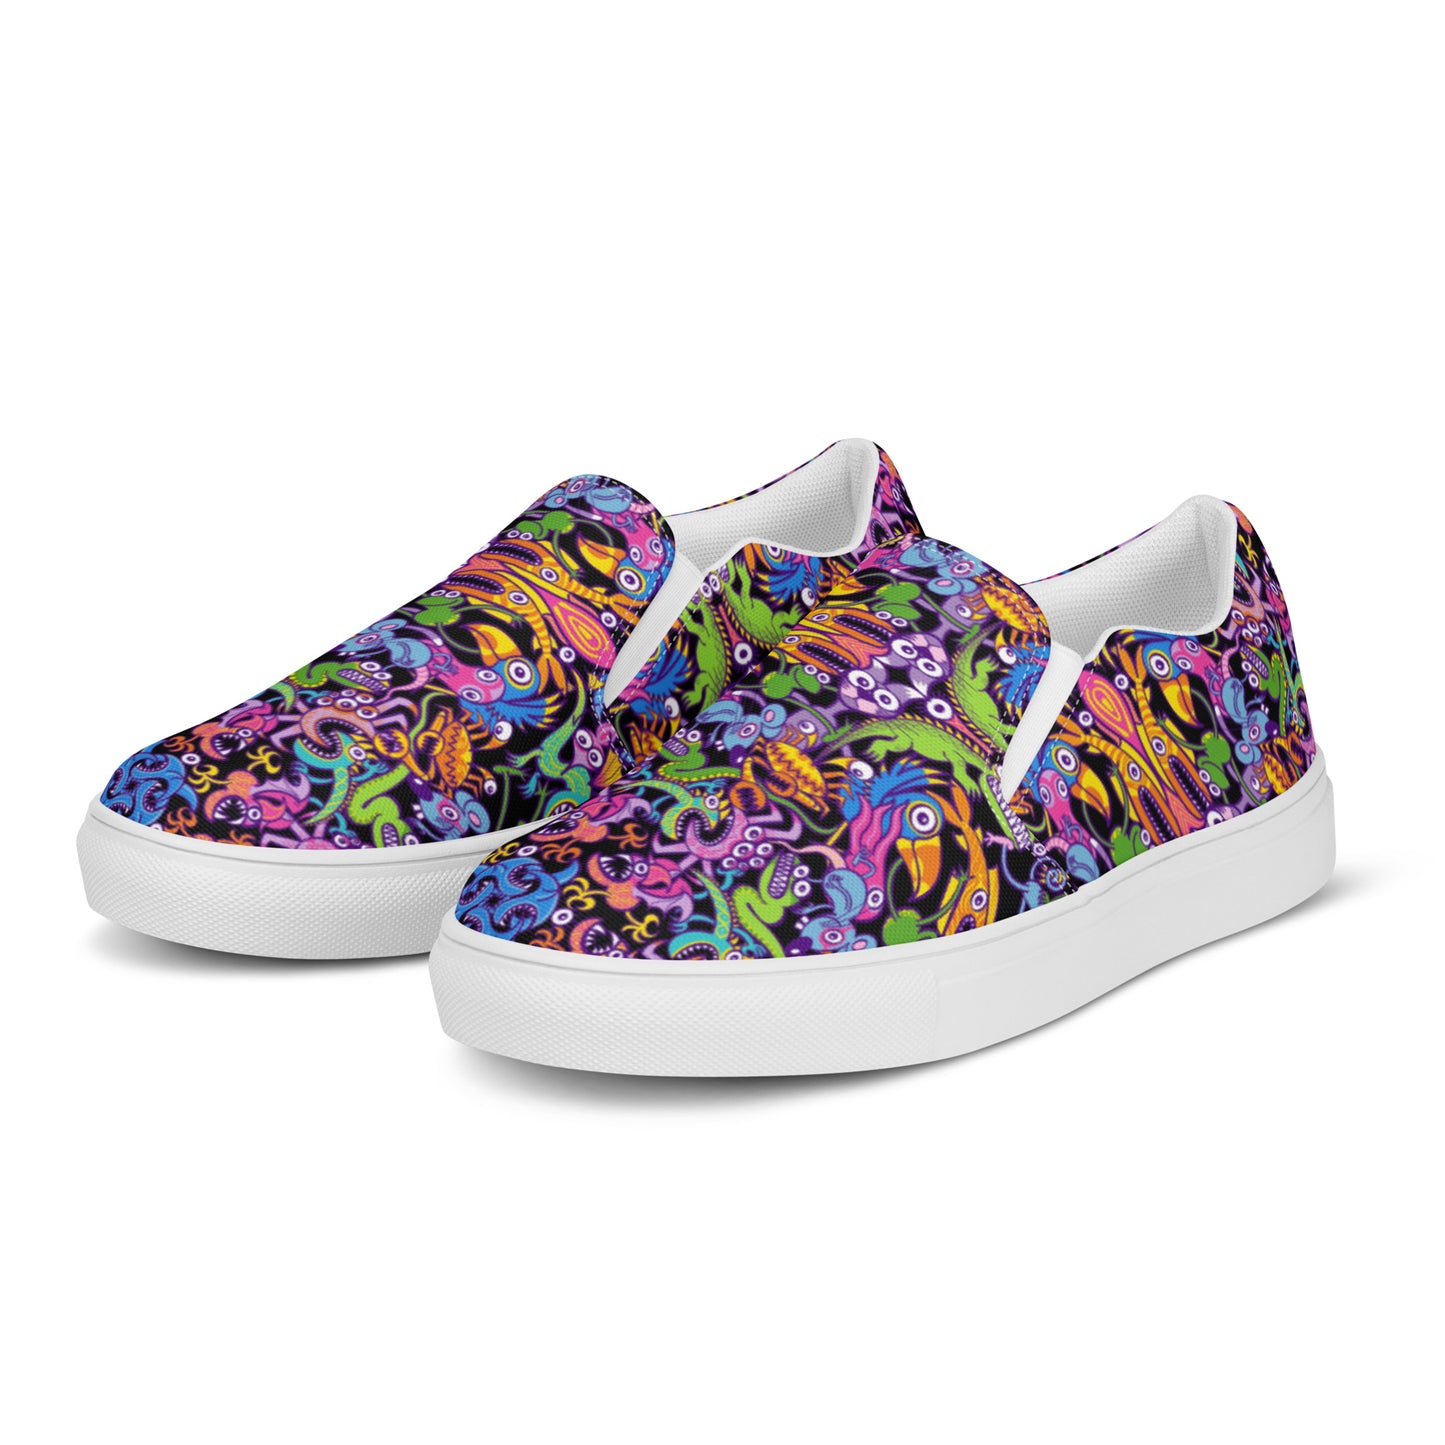 Eccentric critters in a lively crazy festival Men’s slip-on canvas shoes. Overview